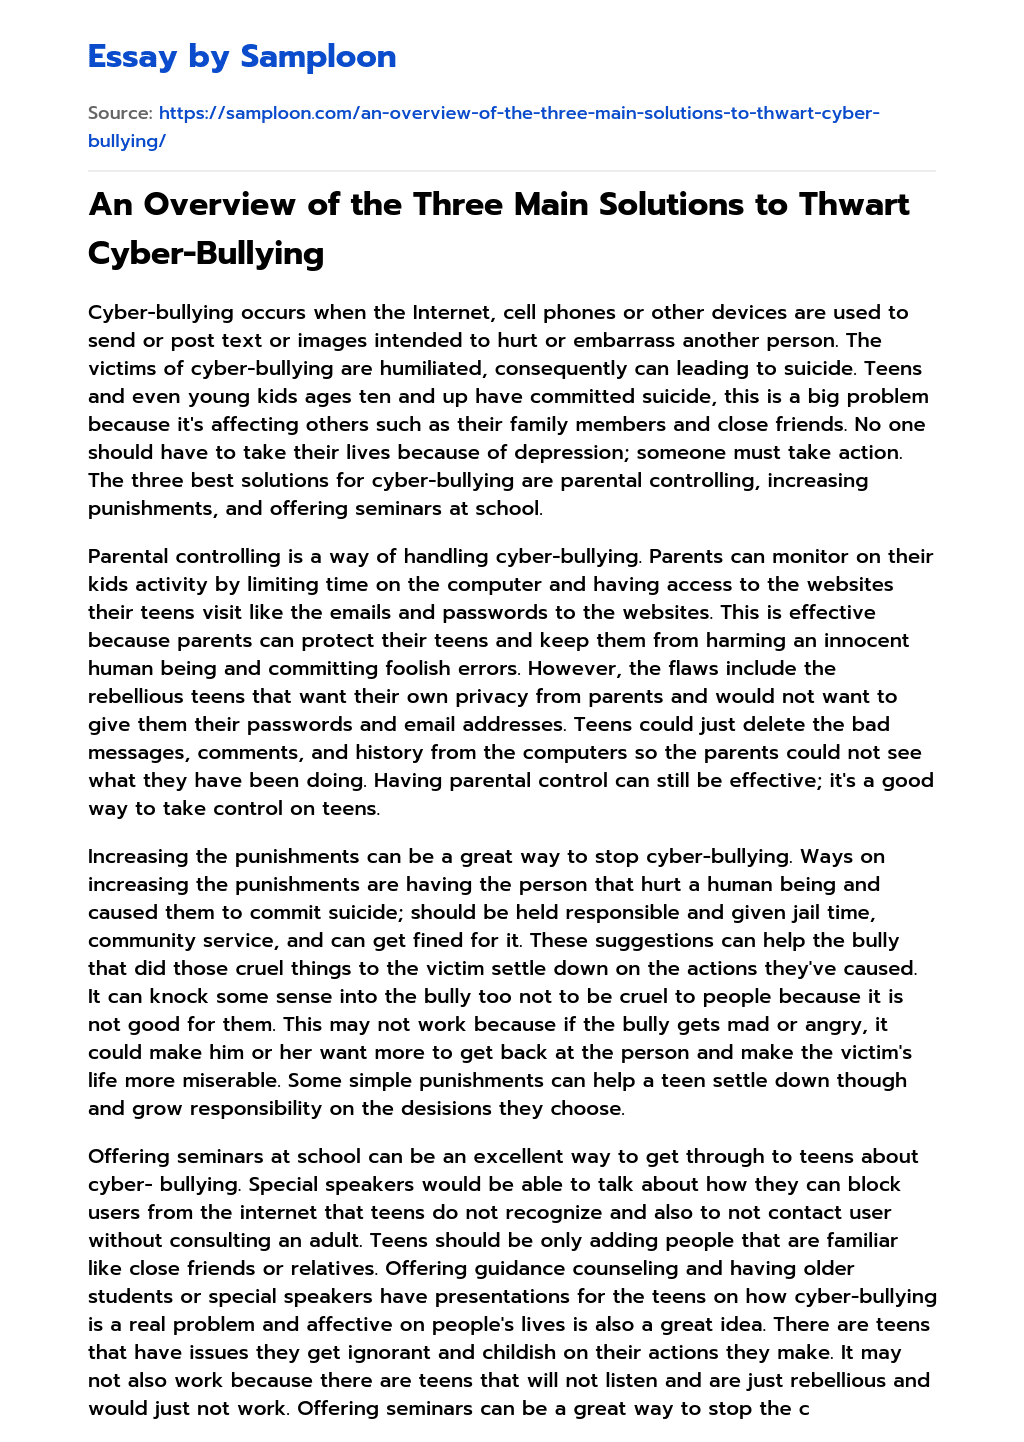 An Overview of the Three Main Solutions to Thwart Cyber-Bullying essay